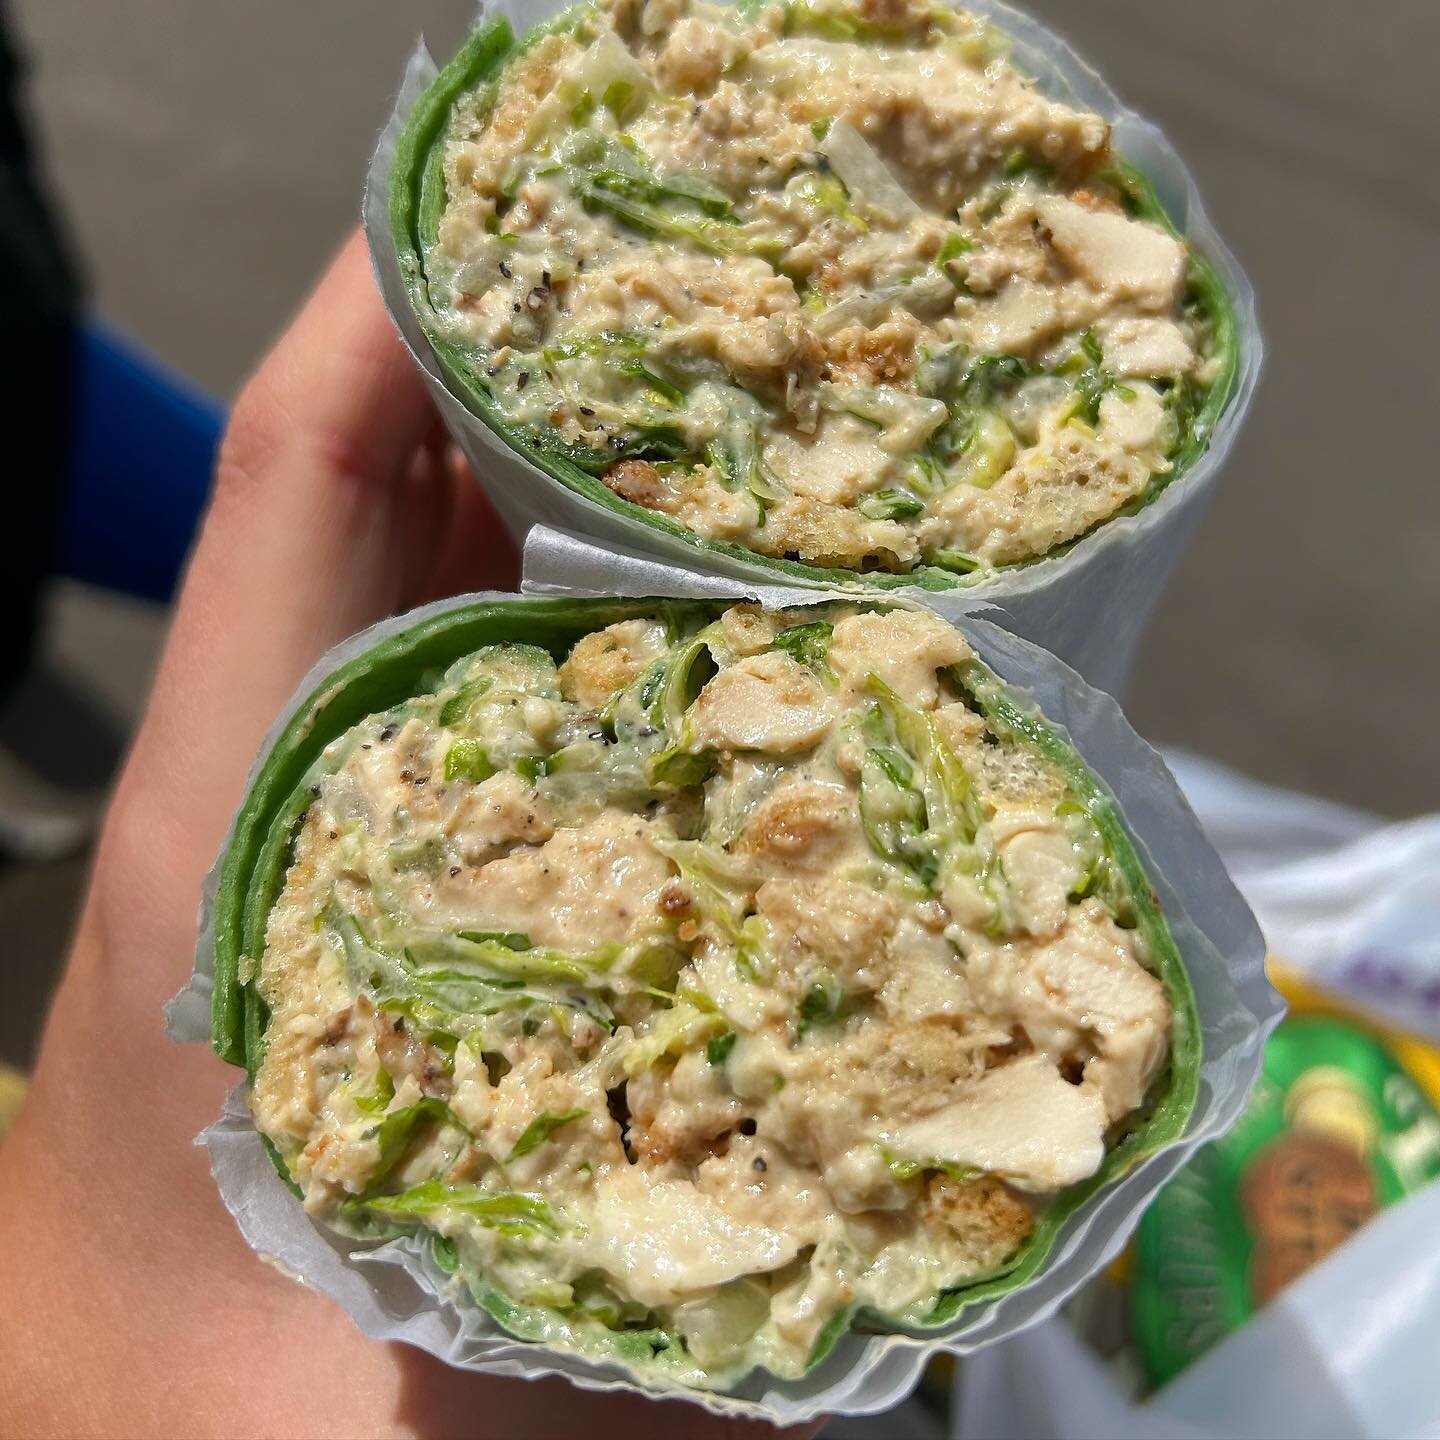 Is there anything better than a chicken Caesar wrap on a sunny day?? 
.
.
.
#chickencaesarwrap #caesarsalad #wrap #spring #lunch #food #nycfood #bodega #nyceats #nycfood #nycfoodie #goodfood #craving #springfood #seasonal #nyceater #eatingnyc #hungry